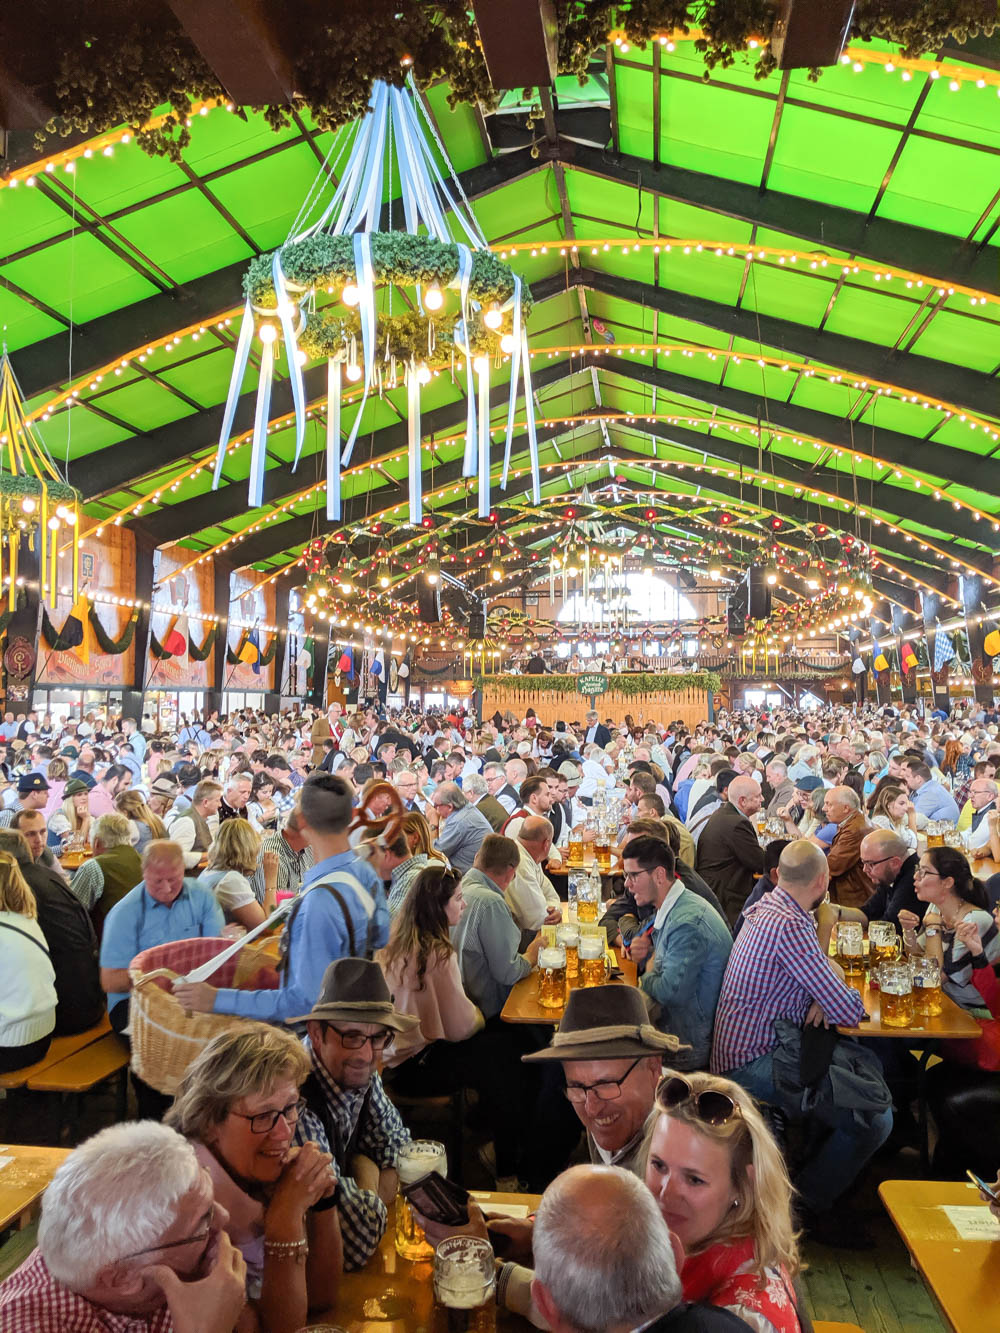 augustiner tent | Find an Oktoberfest near me: The biggest and best Oktoberfests in all 50 states. Most popular Oktoberfest celebrations in each state.